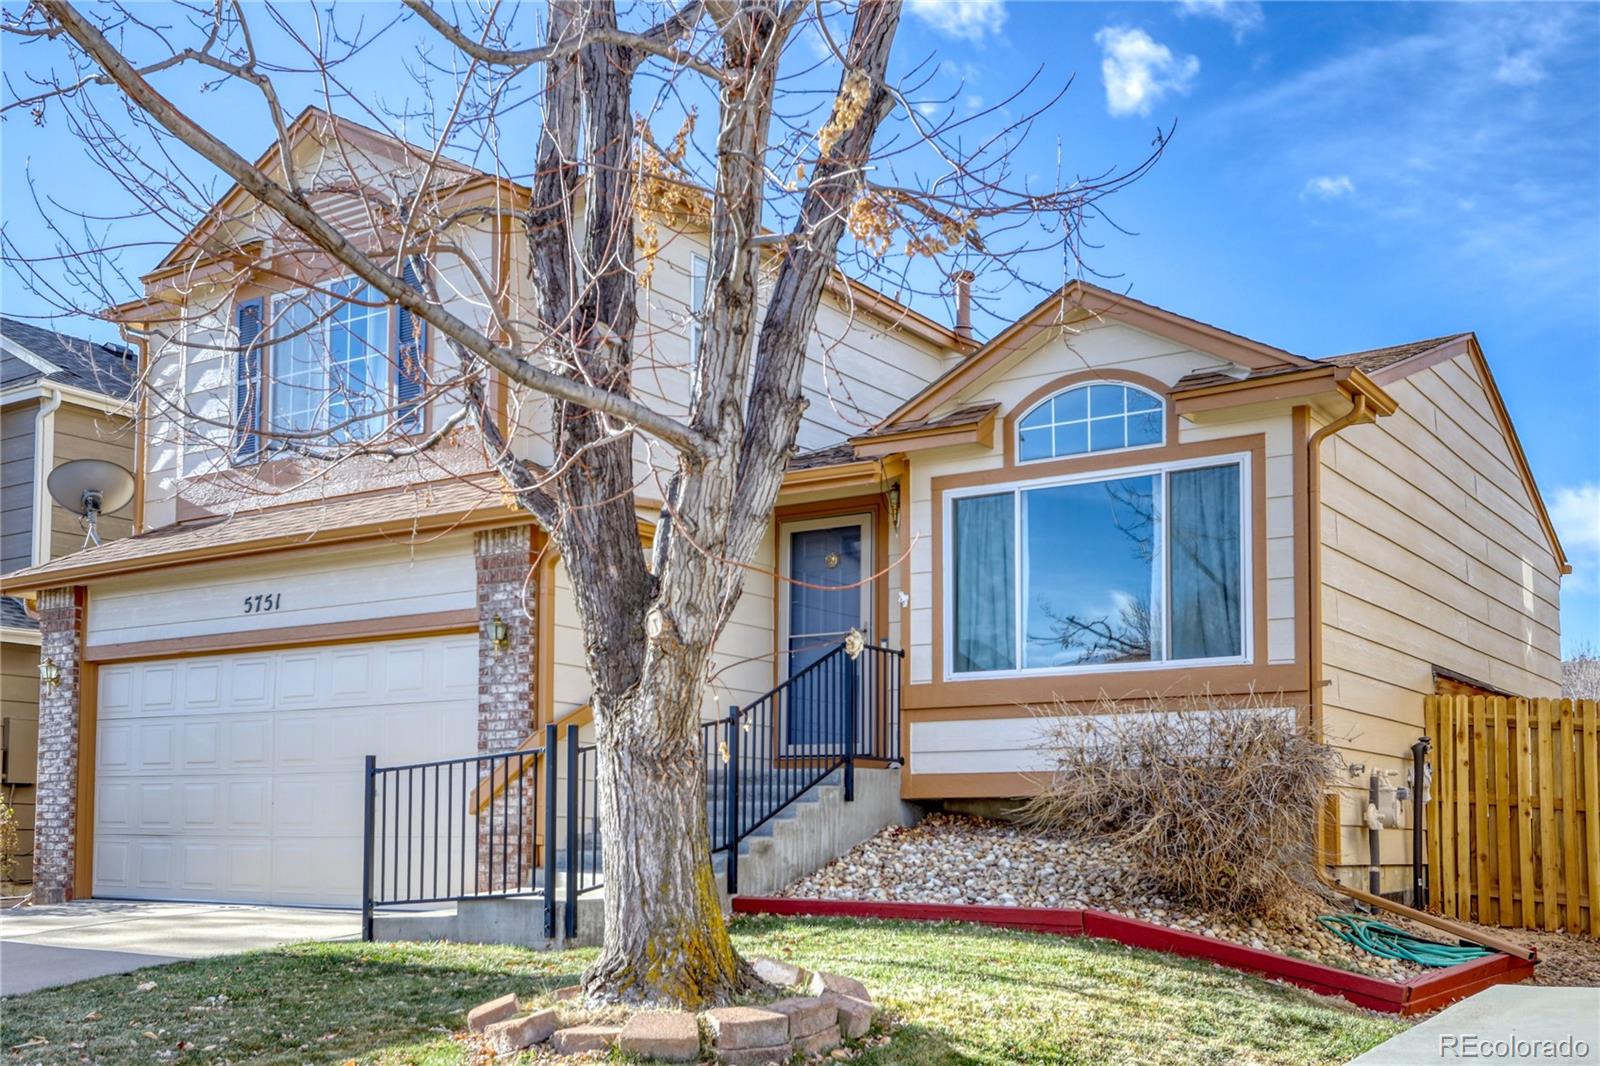 5751 Youngfield, Littleton, CO